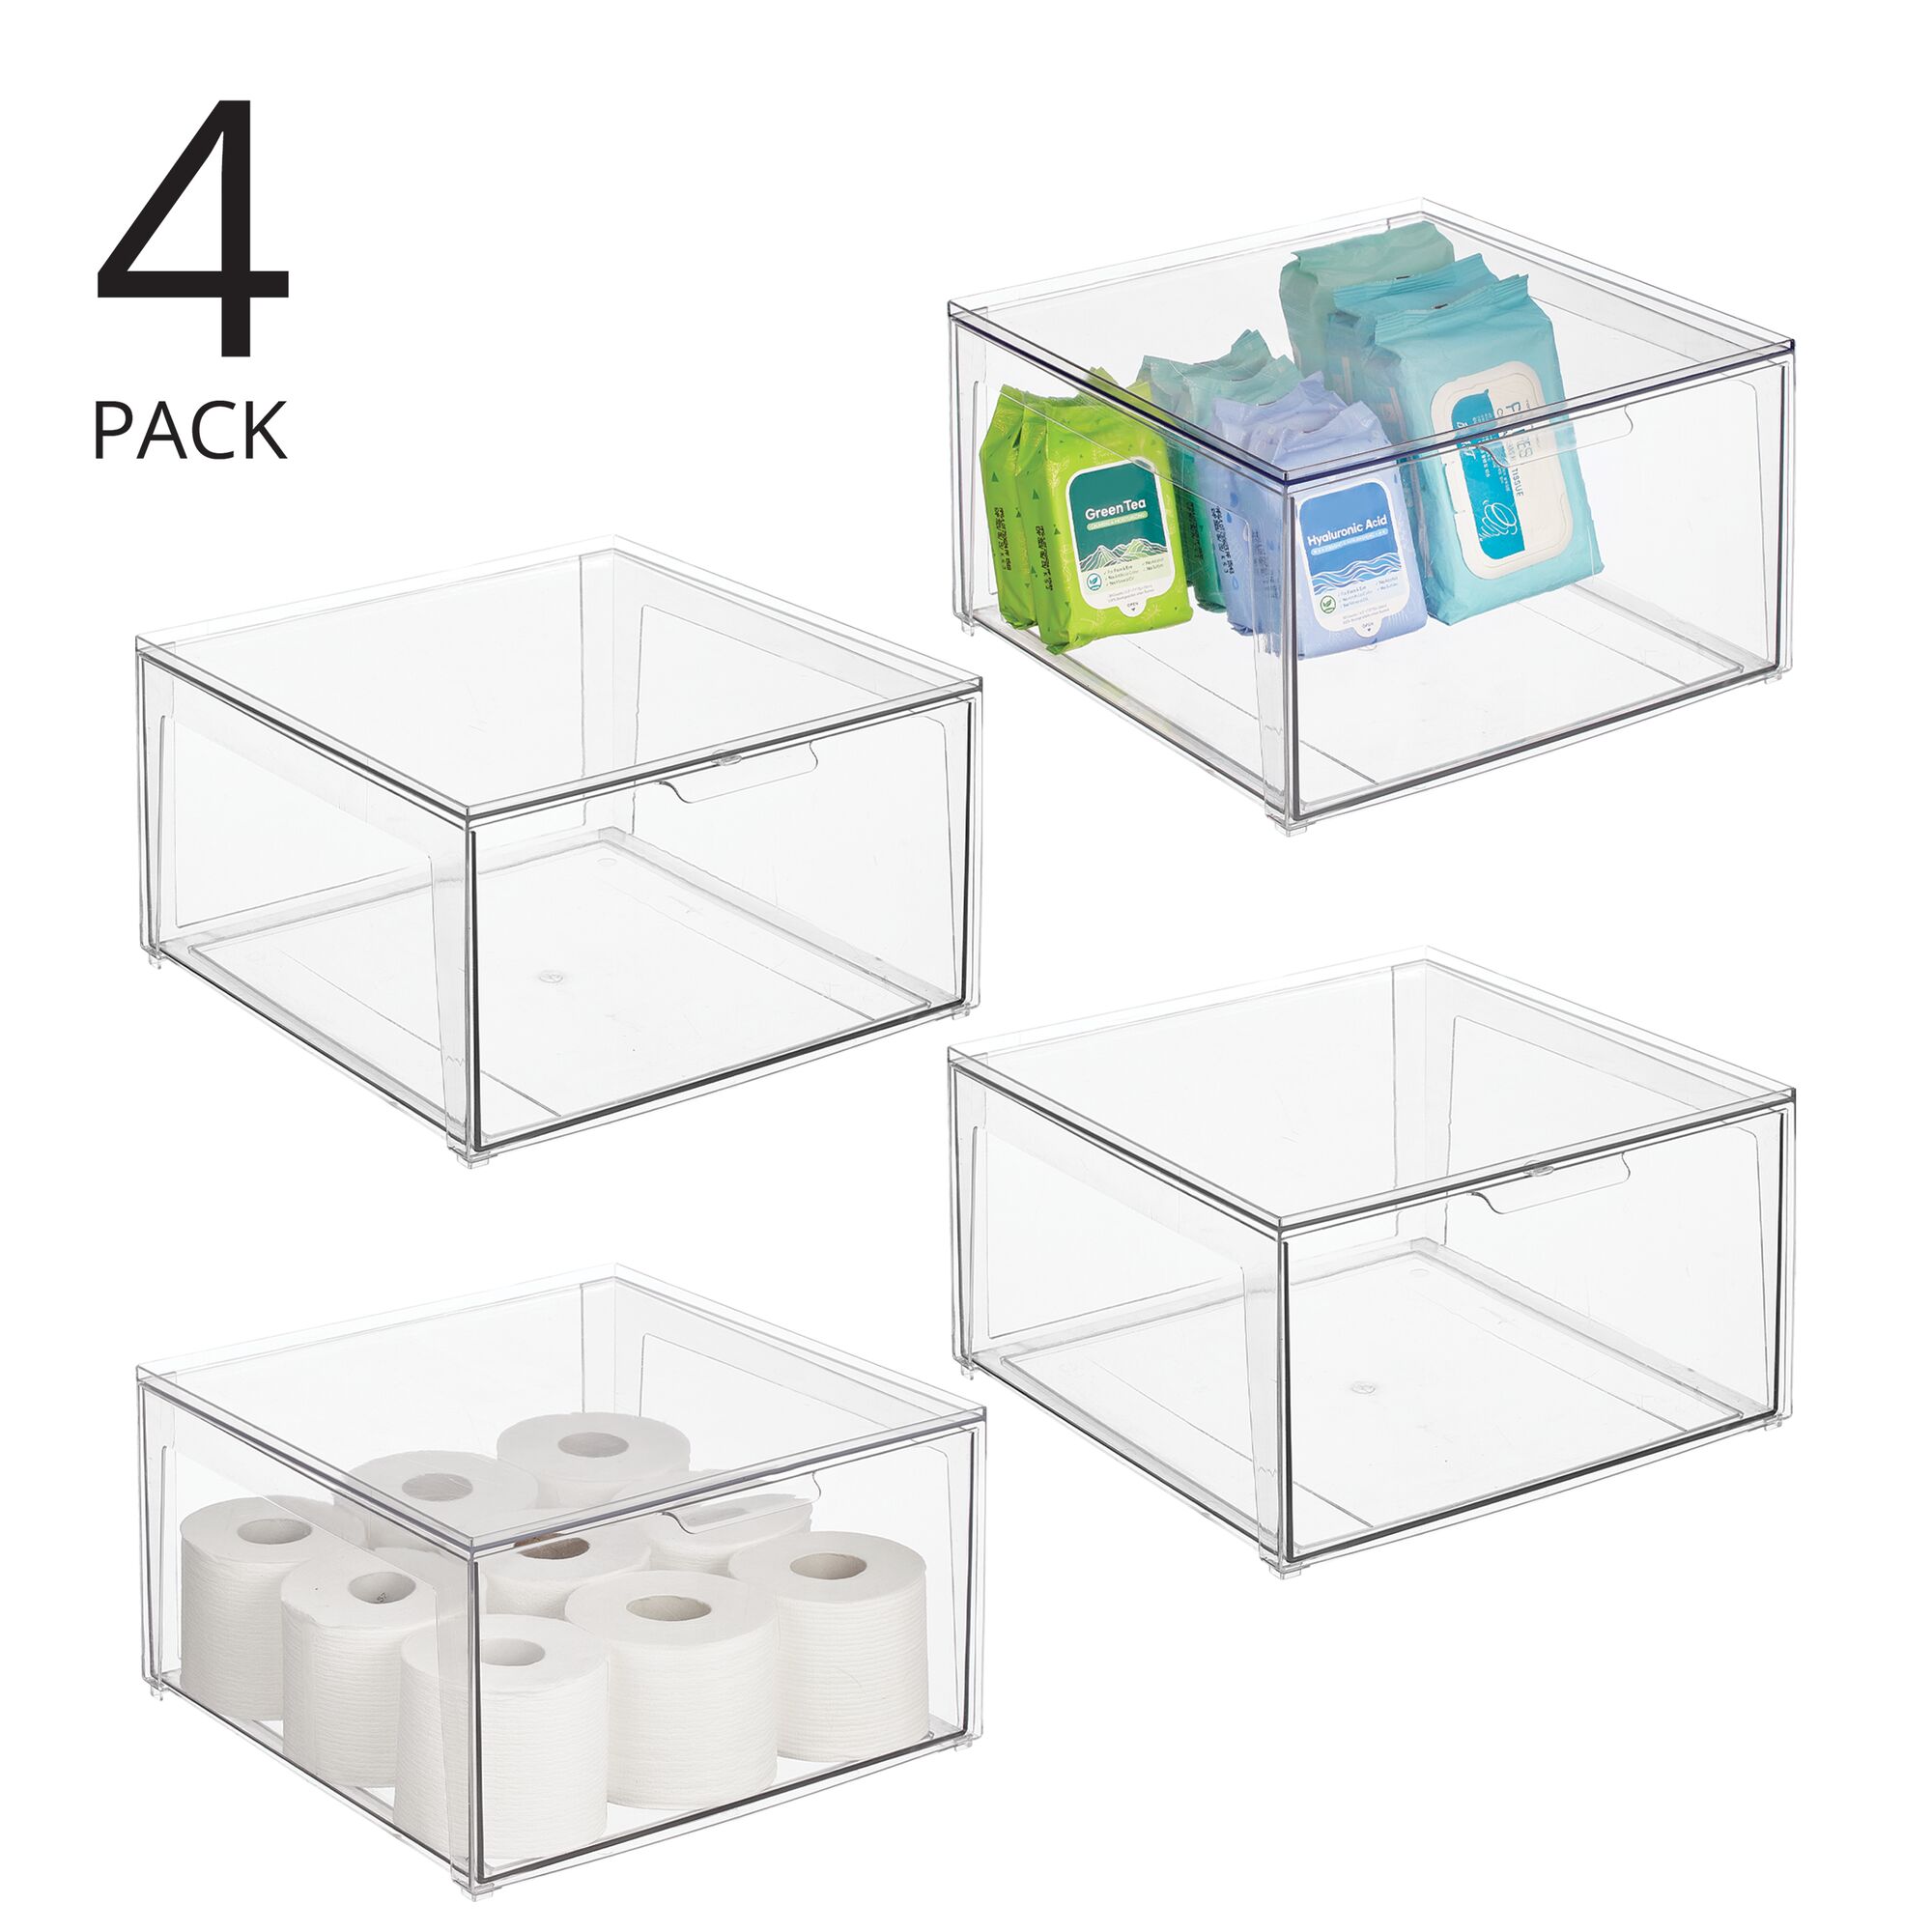 HAWK ( TJ8750D ) 2 Storage Boxes 6 Divided Sections each 4 by 8